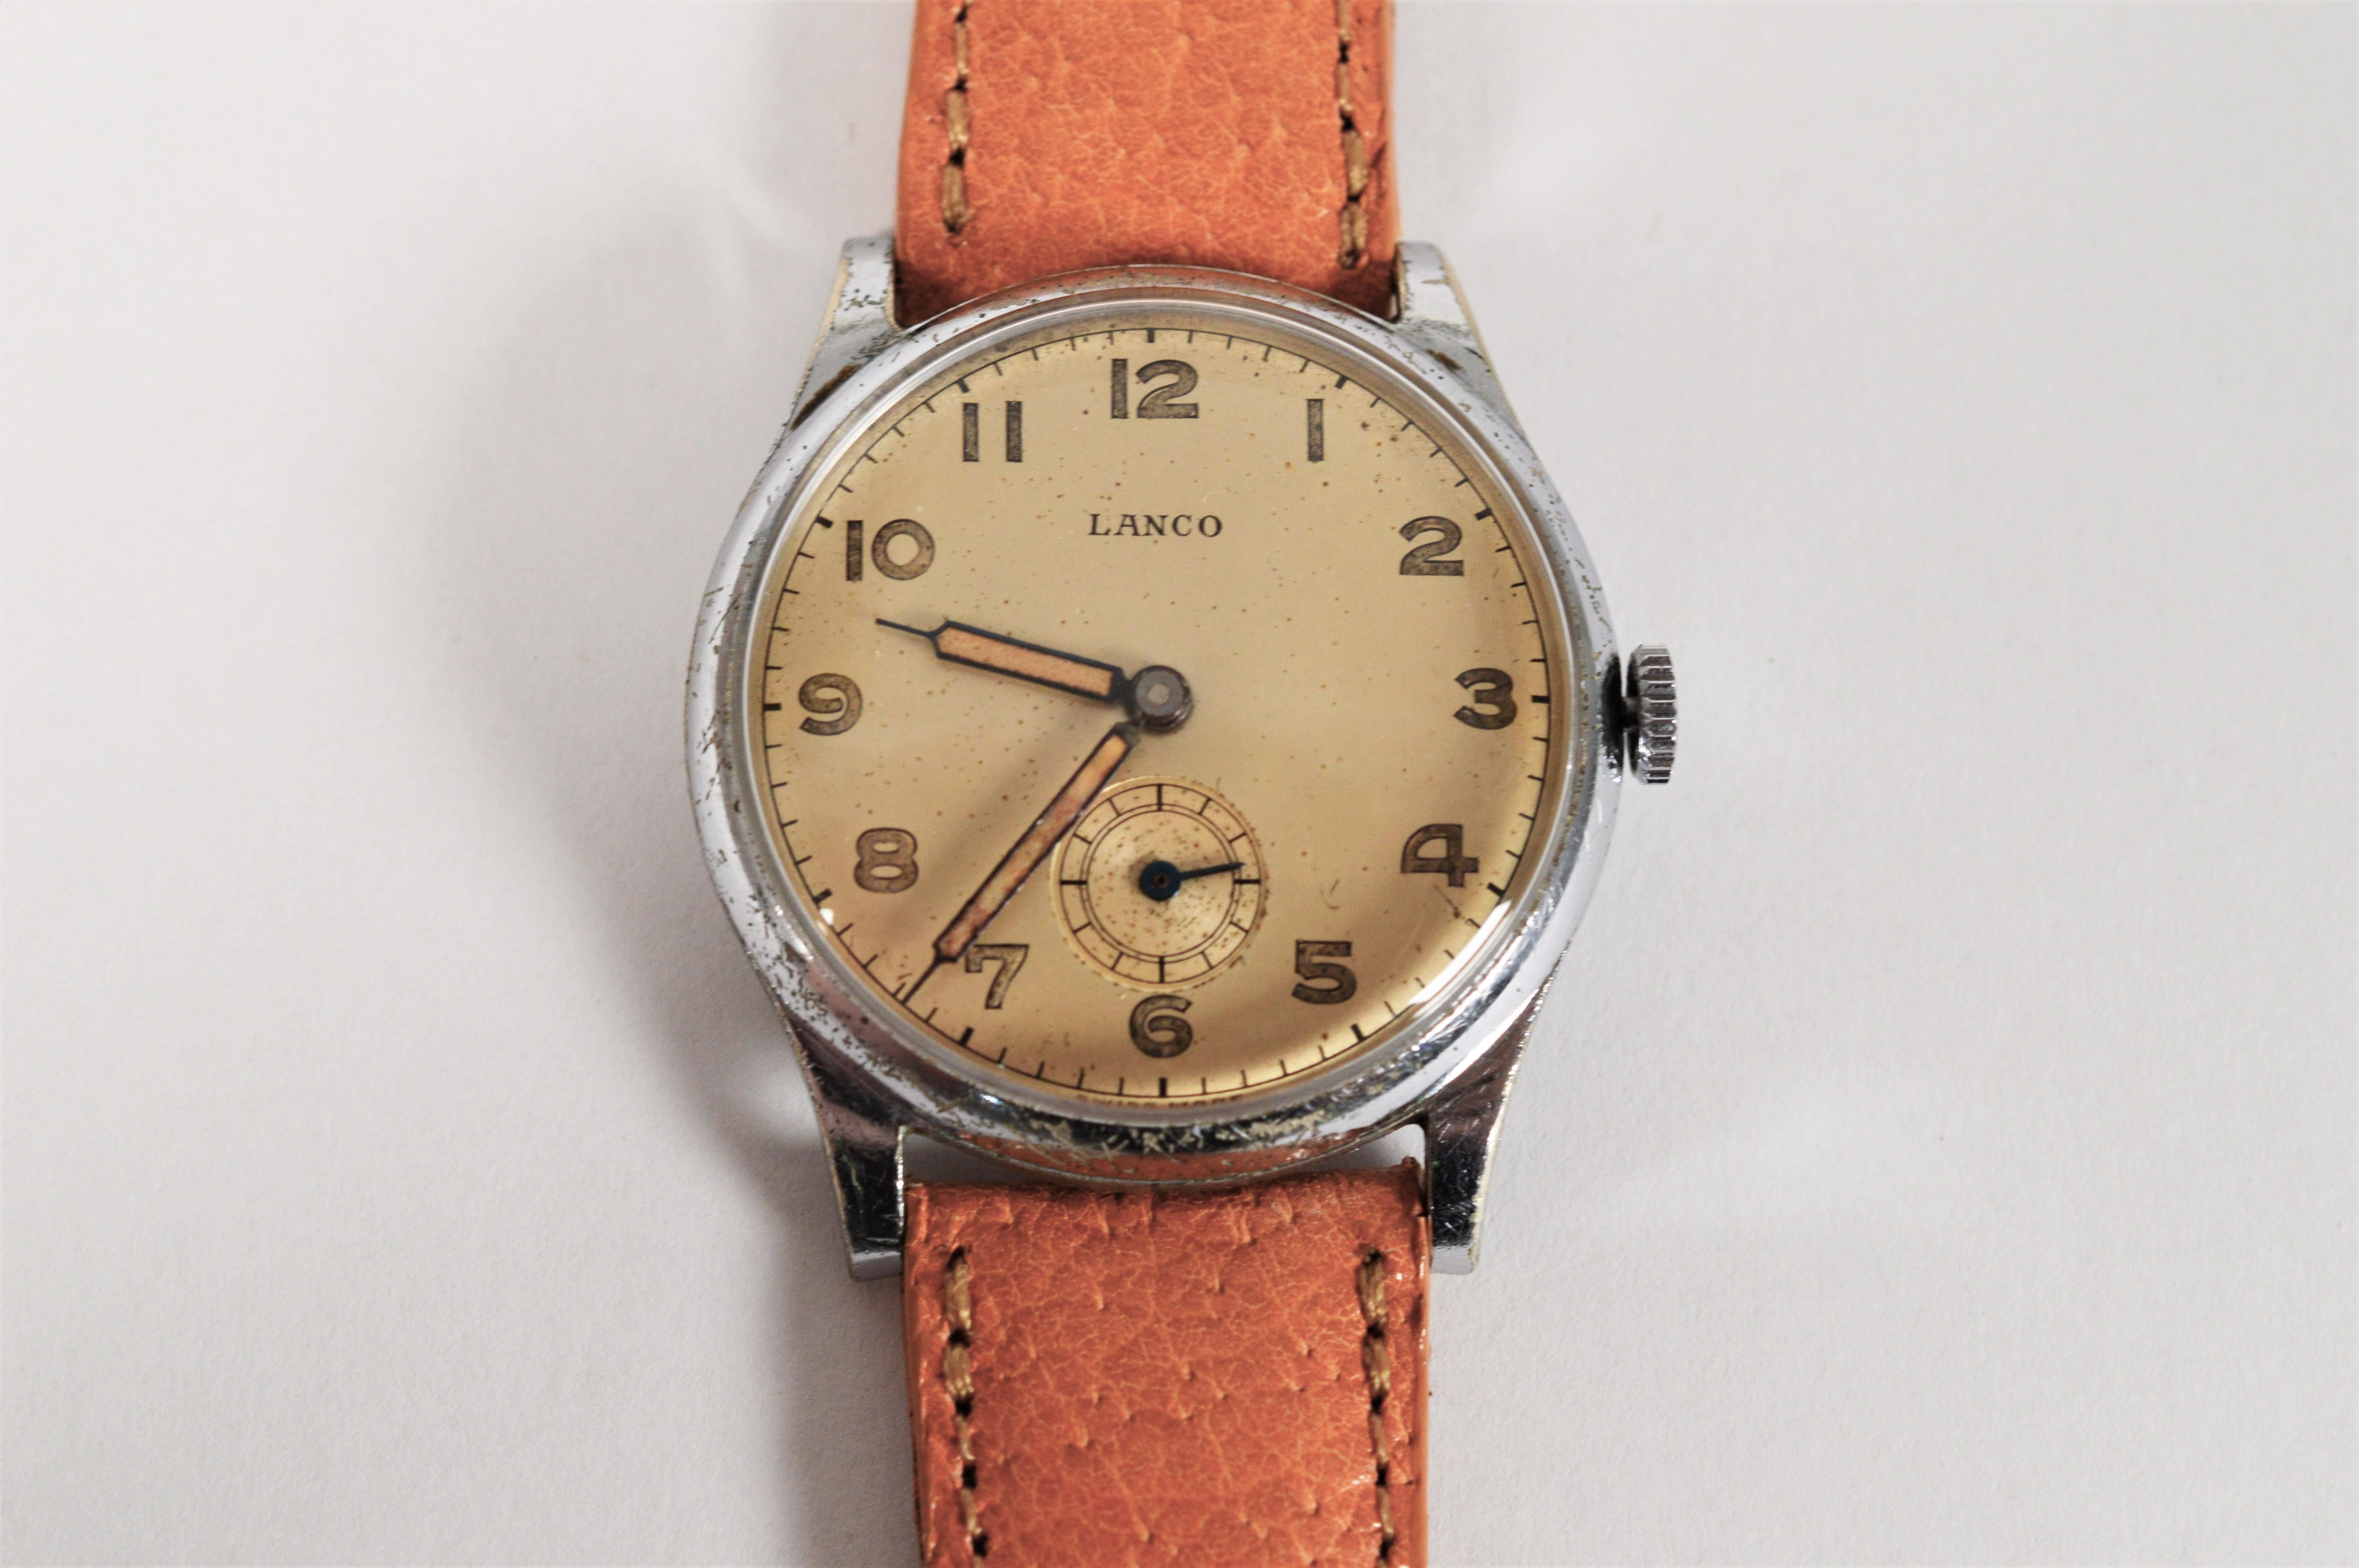 Vintage Lanco Stainless Steel Wrist Watch In Good Condition For Sale In Mount Kisco, NY